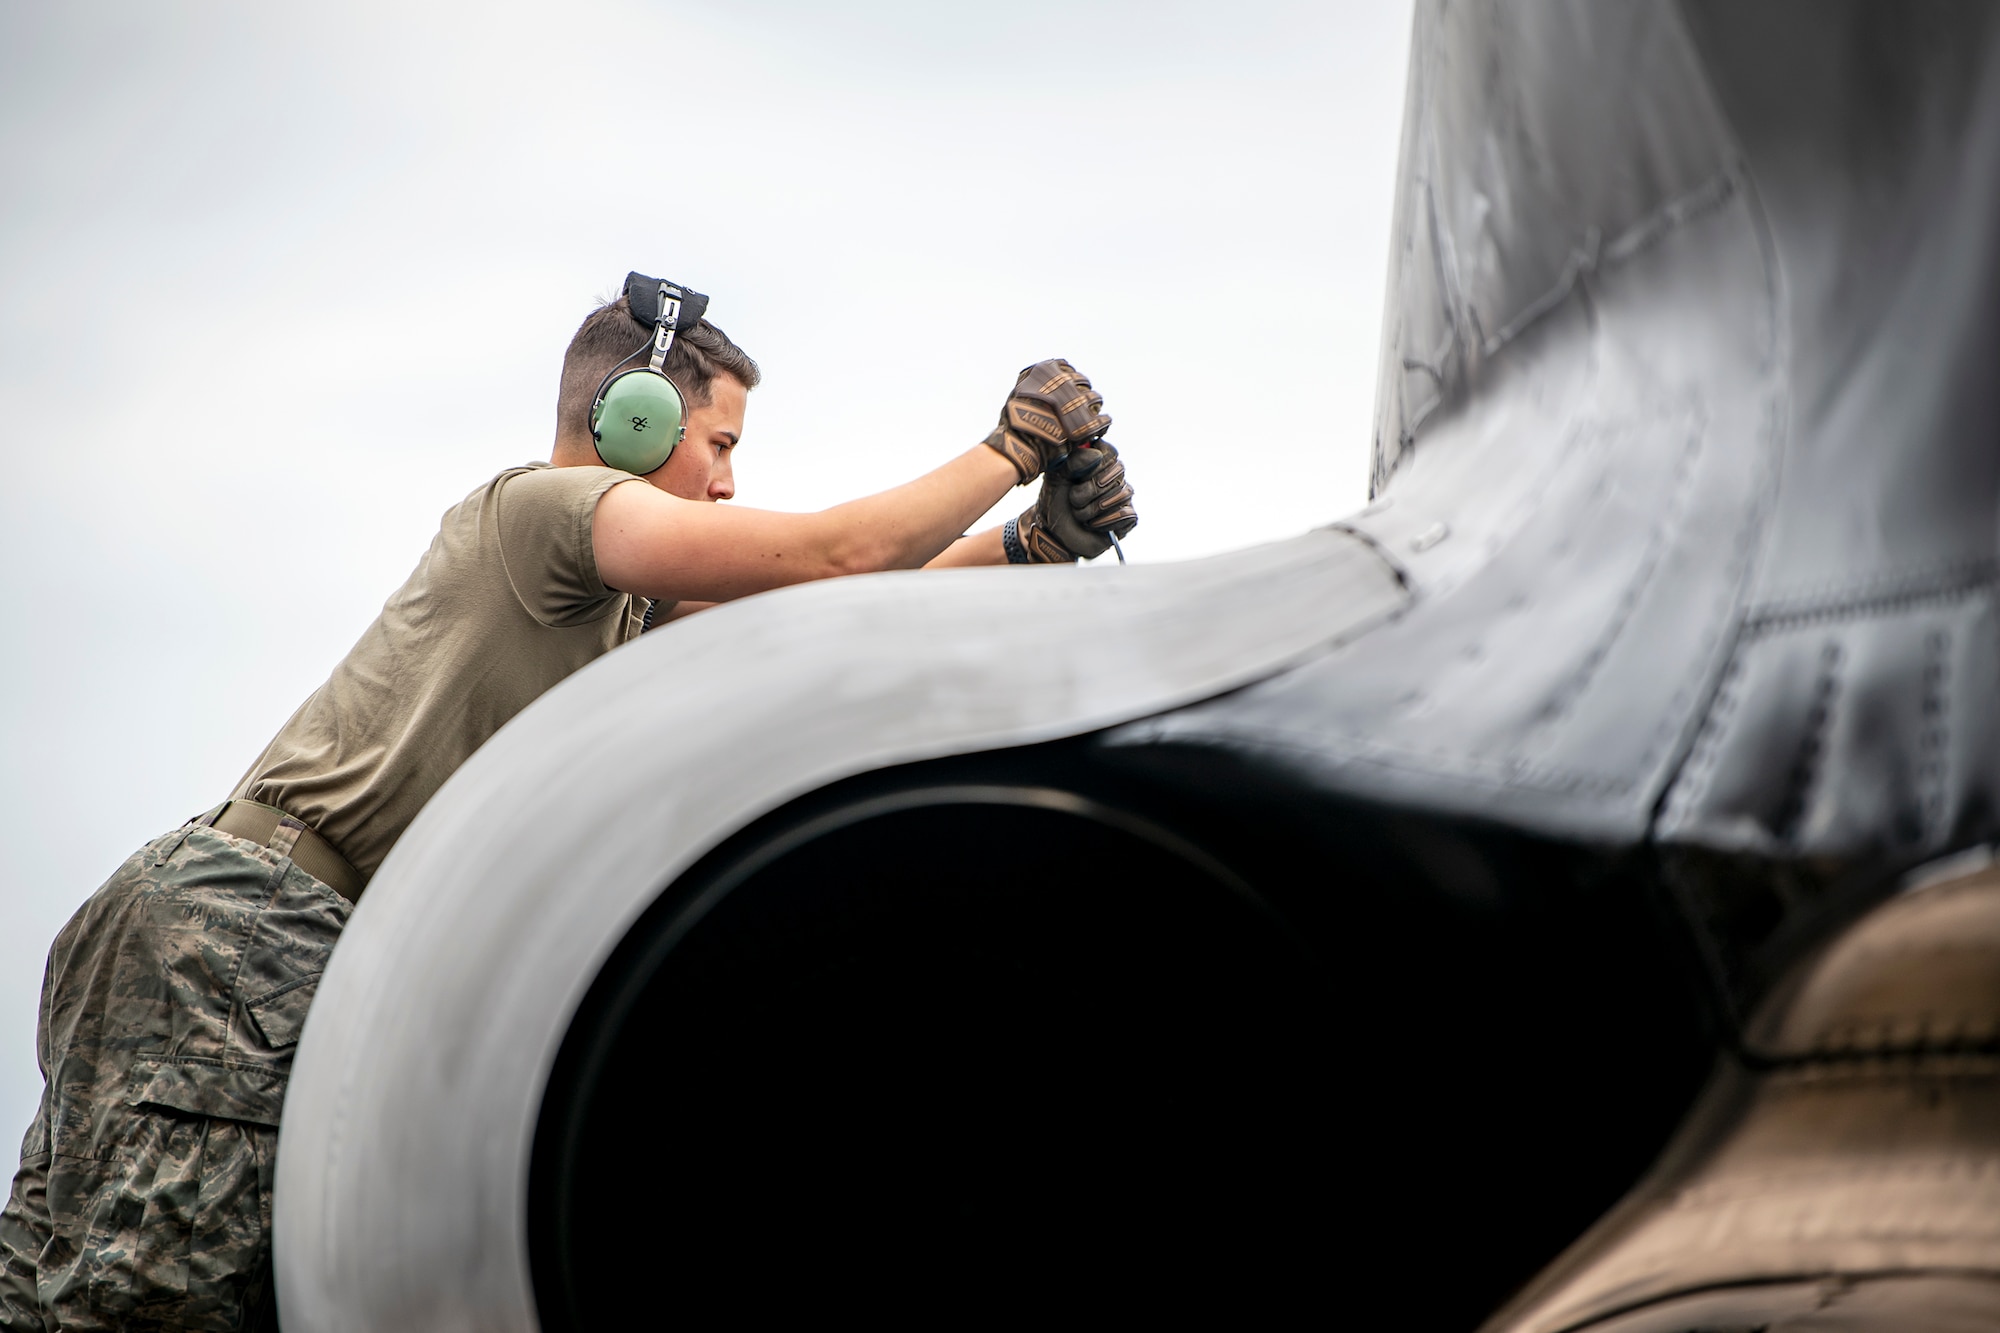 An Airman from the 23rd Aircraft Maintenance Unit, performs maintenance on the engine of a B-52 Stratofortress aircraft assigned to the 23rd Expeditionary Bomb Squadron at RAF Fairford, United Kingdom, Sept. 21, 2022. Dozens of Airmen supported the Bomber Task Force mission which was intended to deter adversaries, assure allies and partners, strengthen interoperability, maintain and demonstrate readiness and lethality. (U.S. Air Force photo by Staff Sgt. Eugene Oliver)